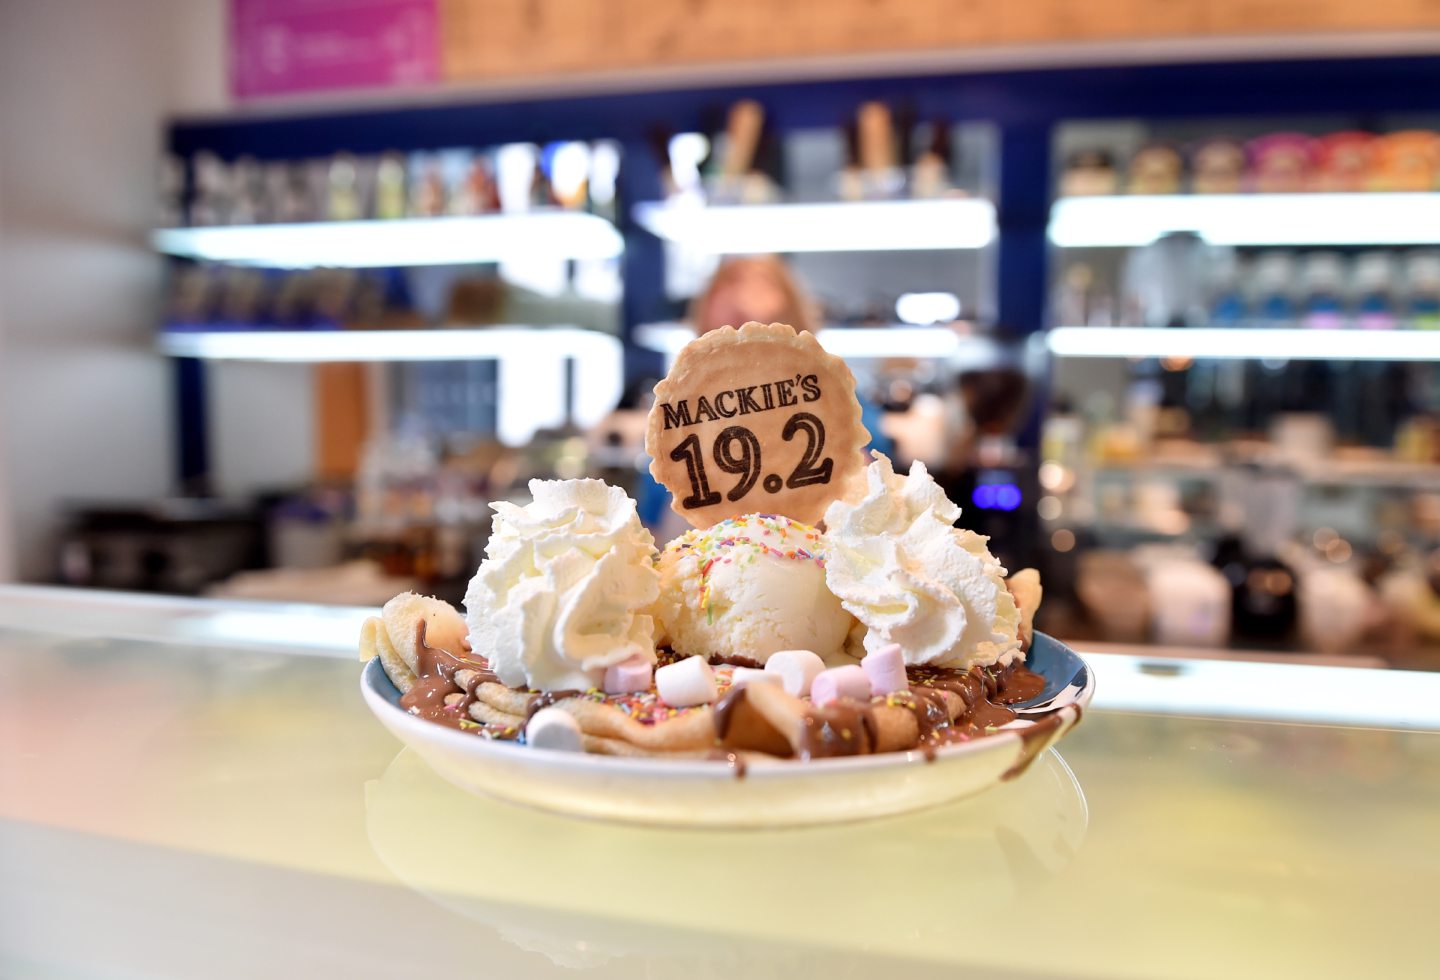 A Mackie's 19.2 crepe topped with ice cream, whipped cream, chocolate sauce, marshmallows and sprinkles.